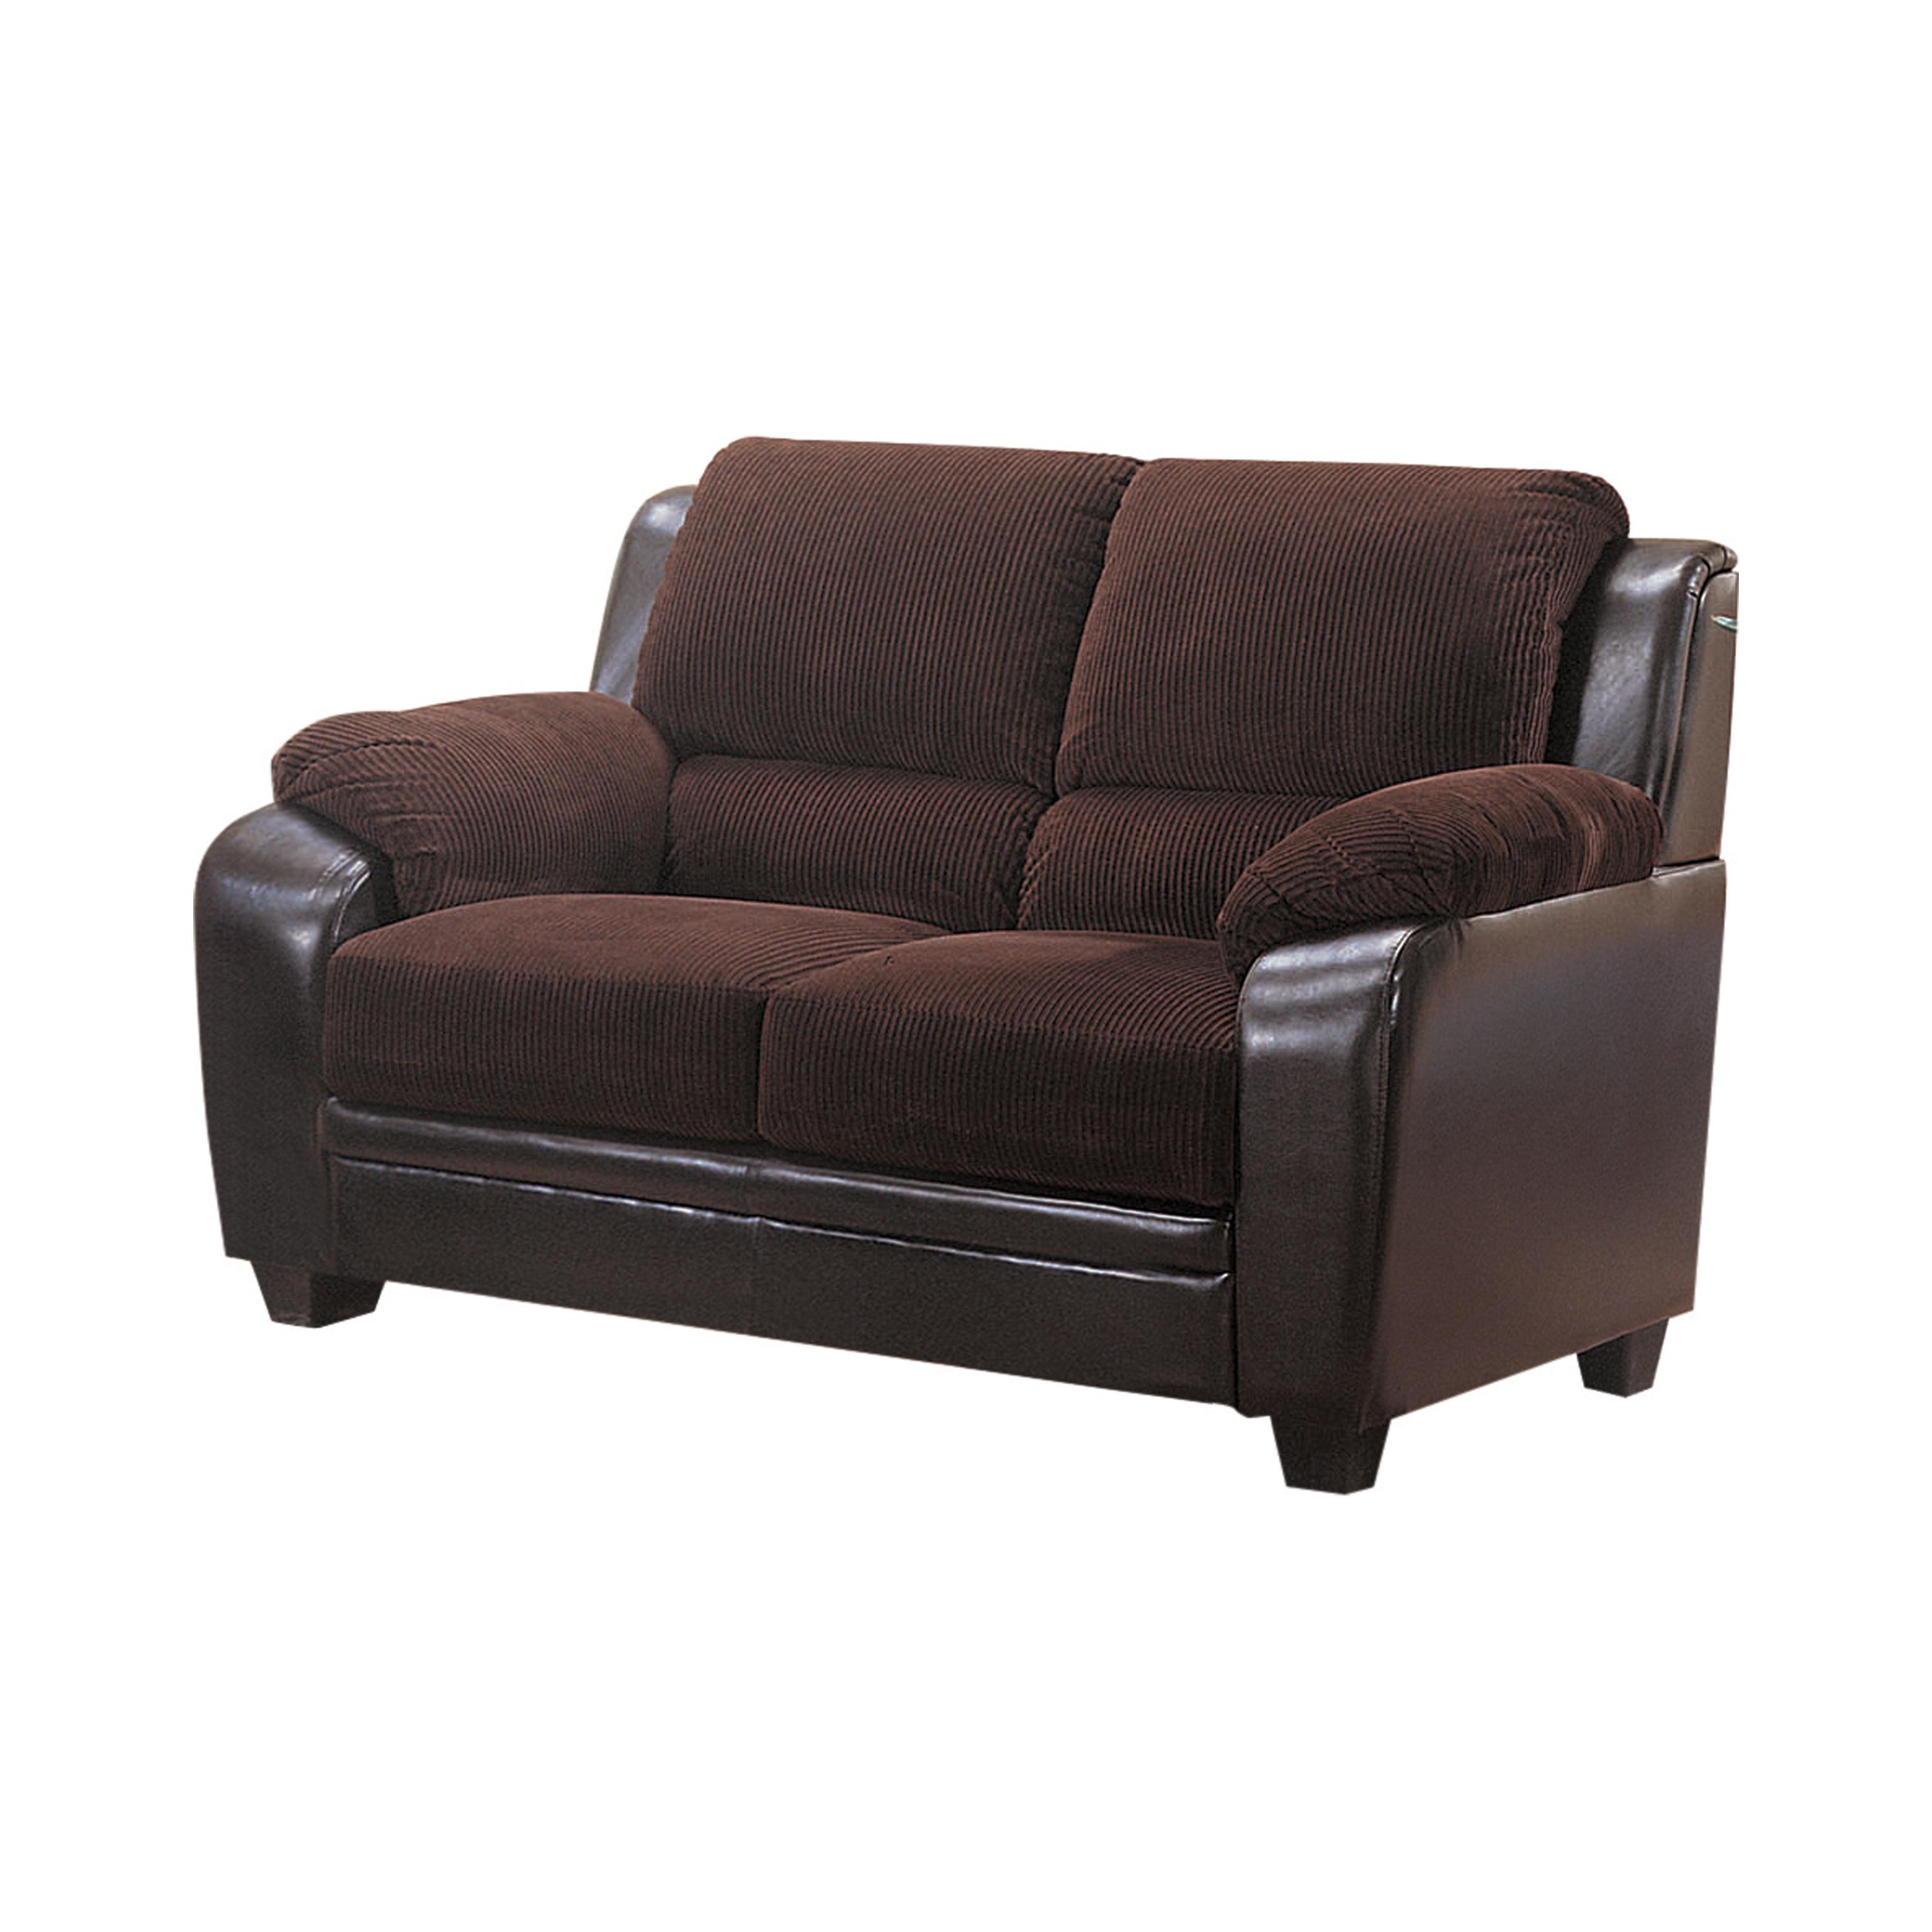 Contemporary Loveseat 502812 Monika 502812 in Chocolate Leatherette